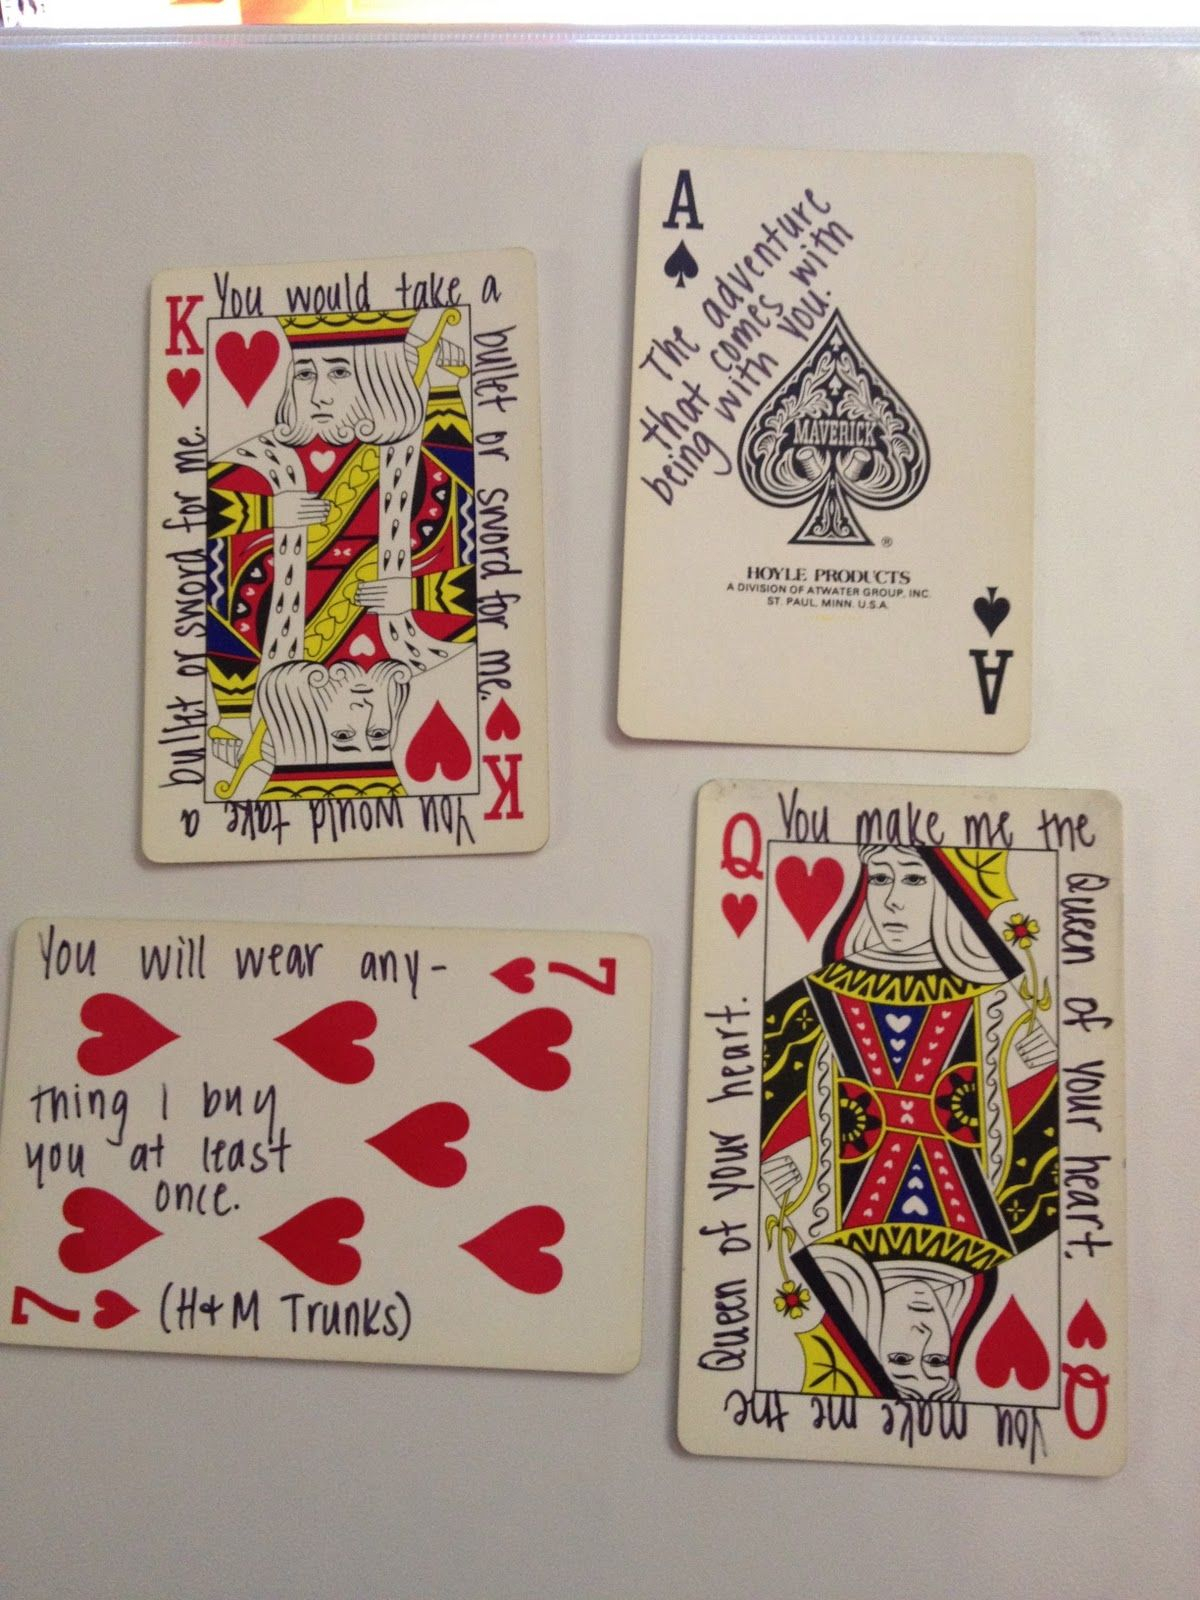 52 Things I Love About You: Old Or New Deck Of Cards Intended For 52 Things I Love About You Deck Of Cards Template